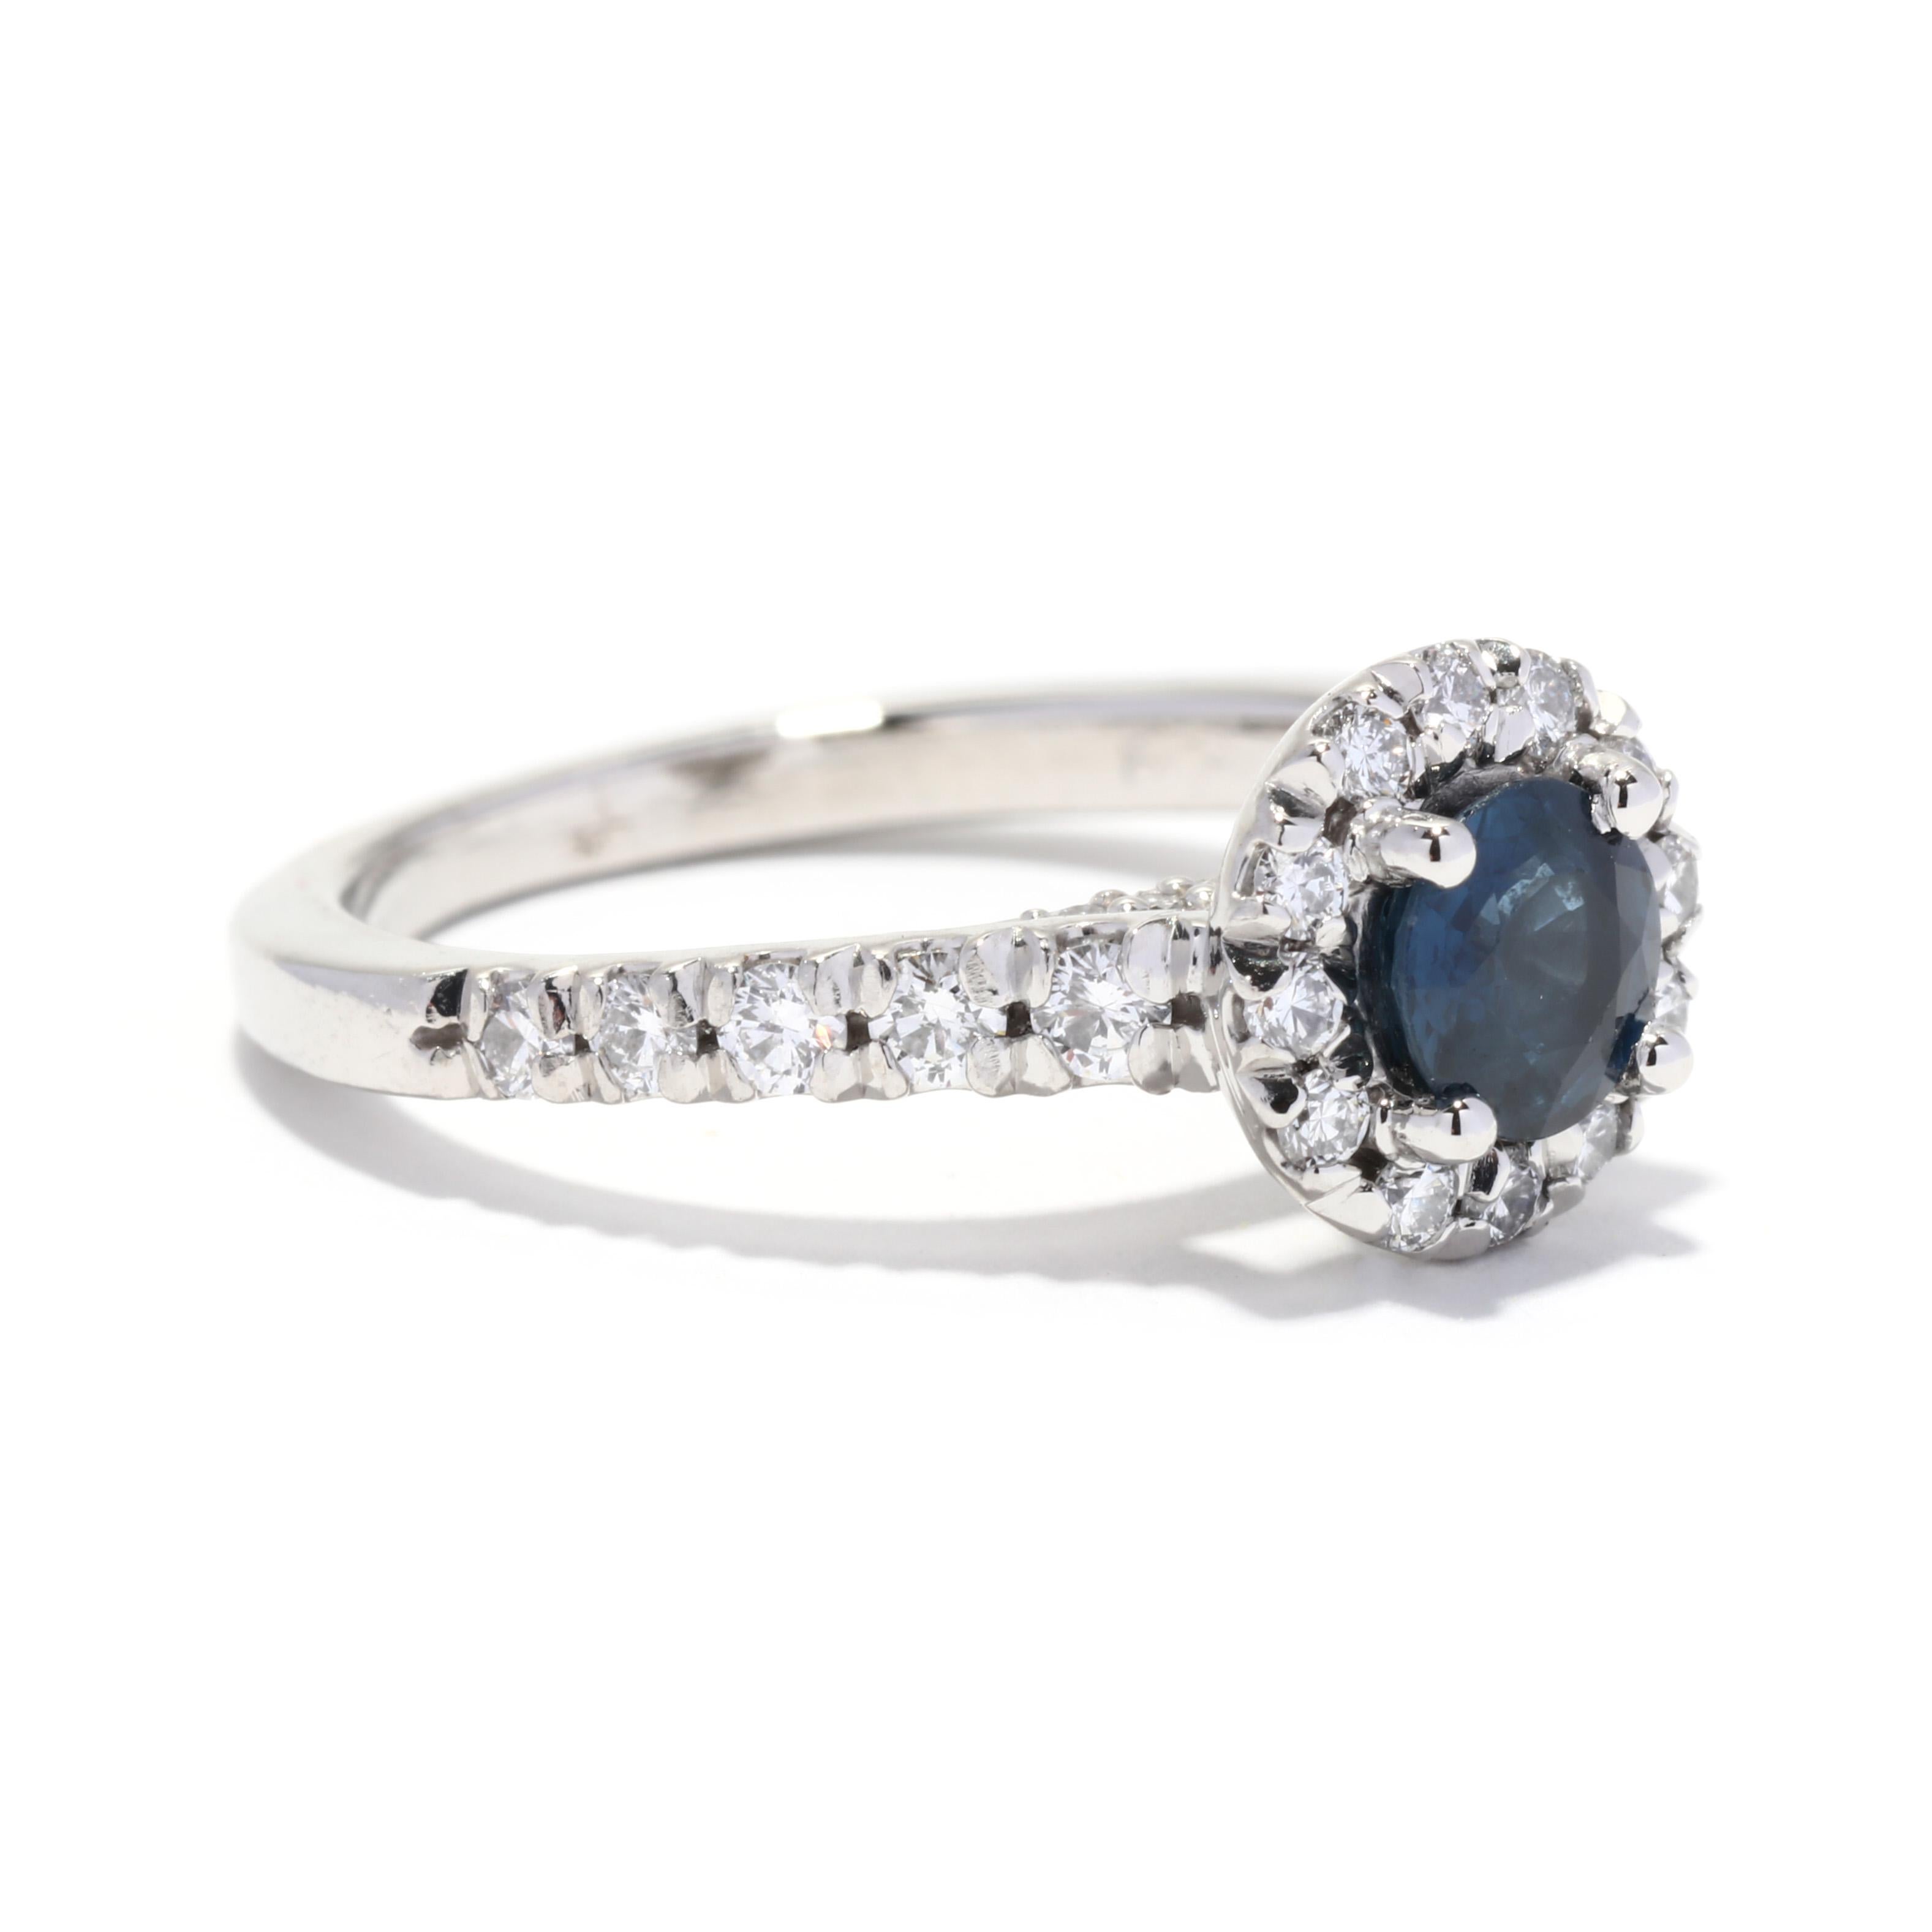 A vintage platinum sapphire and diamond halo engagement ring. This alternative engagement ring features a prong set, round cut sapphire weighing approximately .70 carat surrounded by a halo of full cut diamonds and with diamonds down the band and on